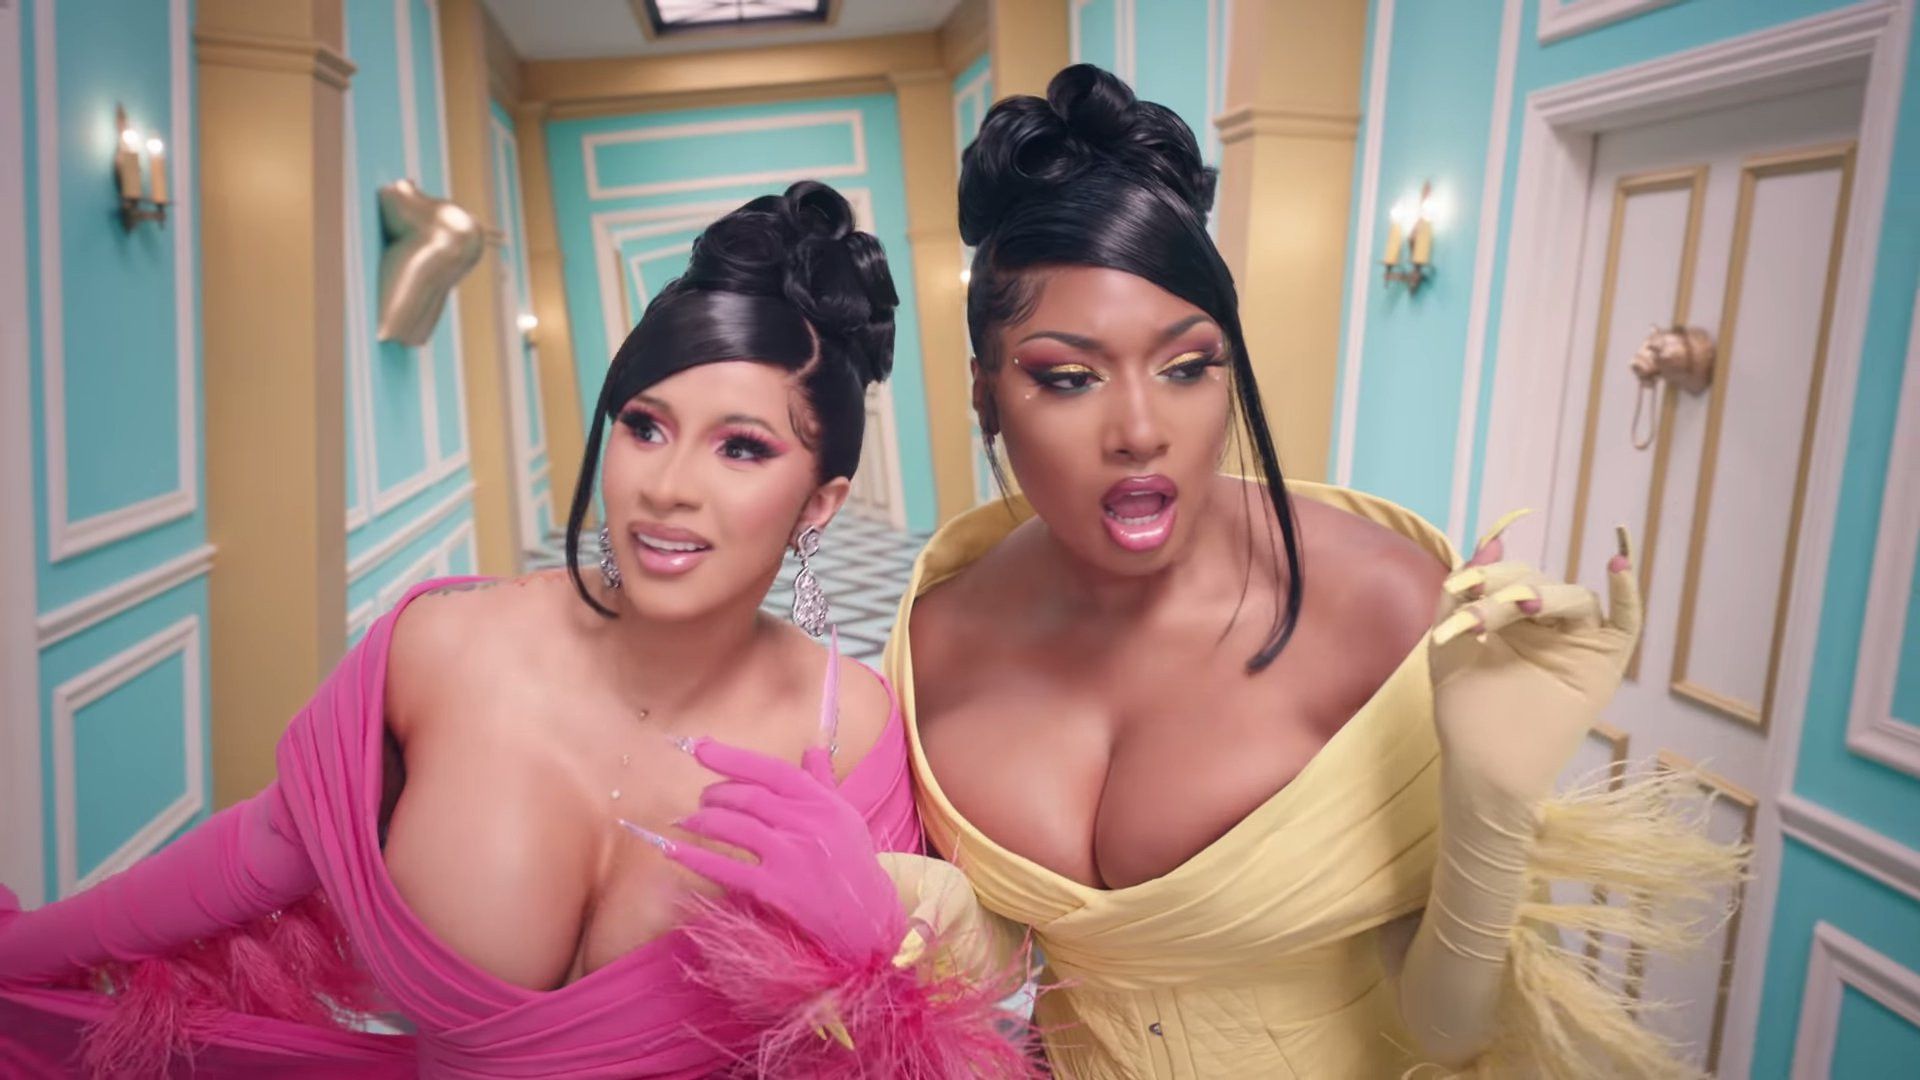 Cardi B And Megan Thee Stallion's WAP Named Number 1 For 'most Read Lyrics'